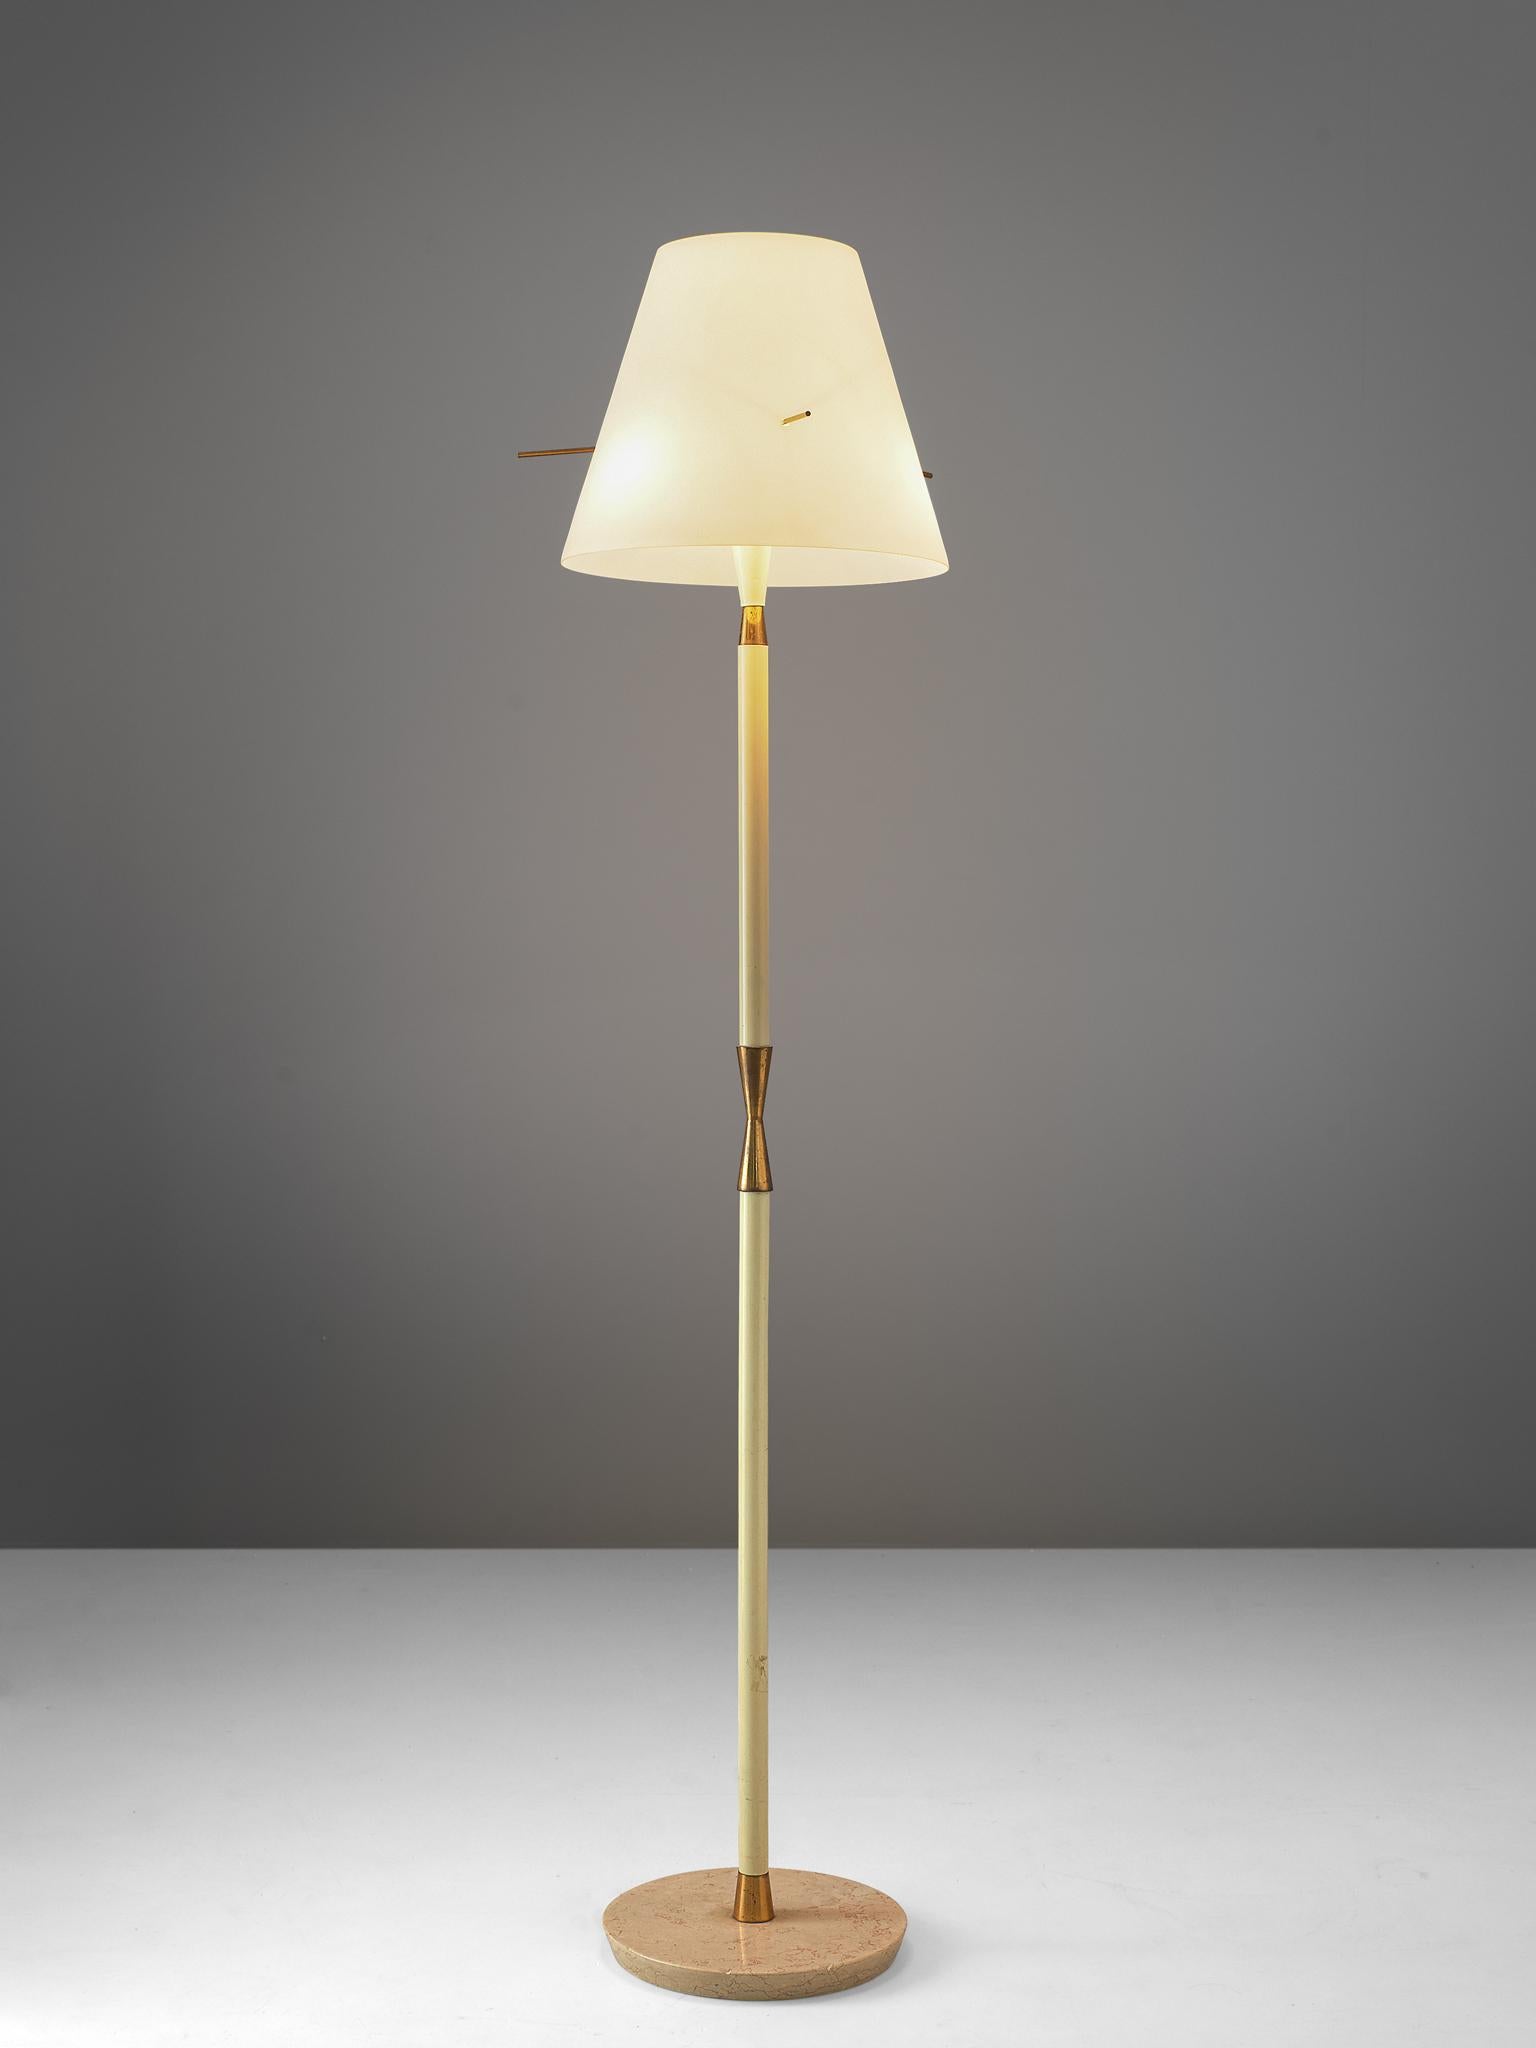 Floor lamp, metal, granite and brass, Italy, 1960s.

Elegant floor lamp with granite foot. Consisting of an off-white lacquered metal base, finished with brass hour-glass details. The base holds up a large shade with brass pins. The